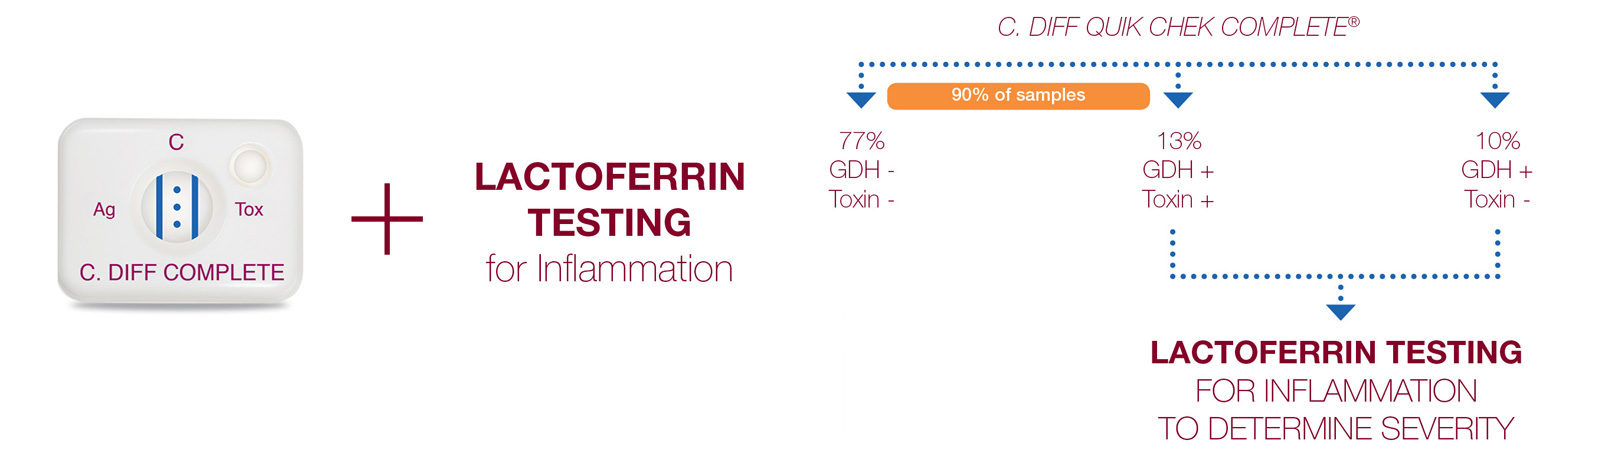 C.Diff complete + Lactoferrin testing for inflammation. C.Diff Quik Chek Complete®